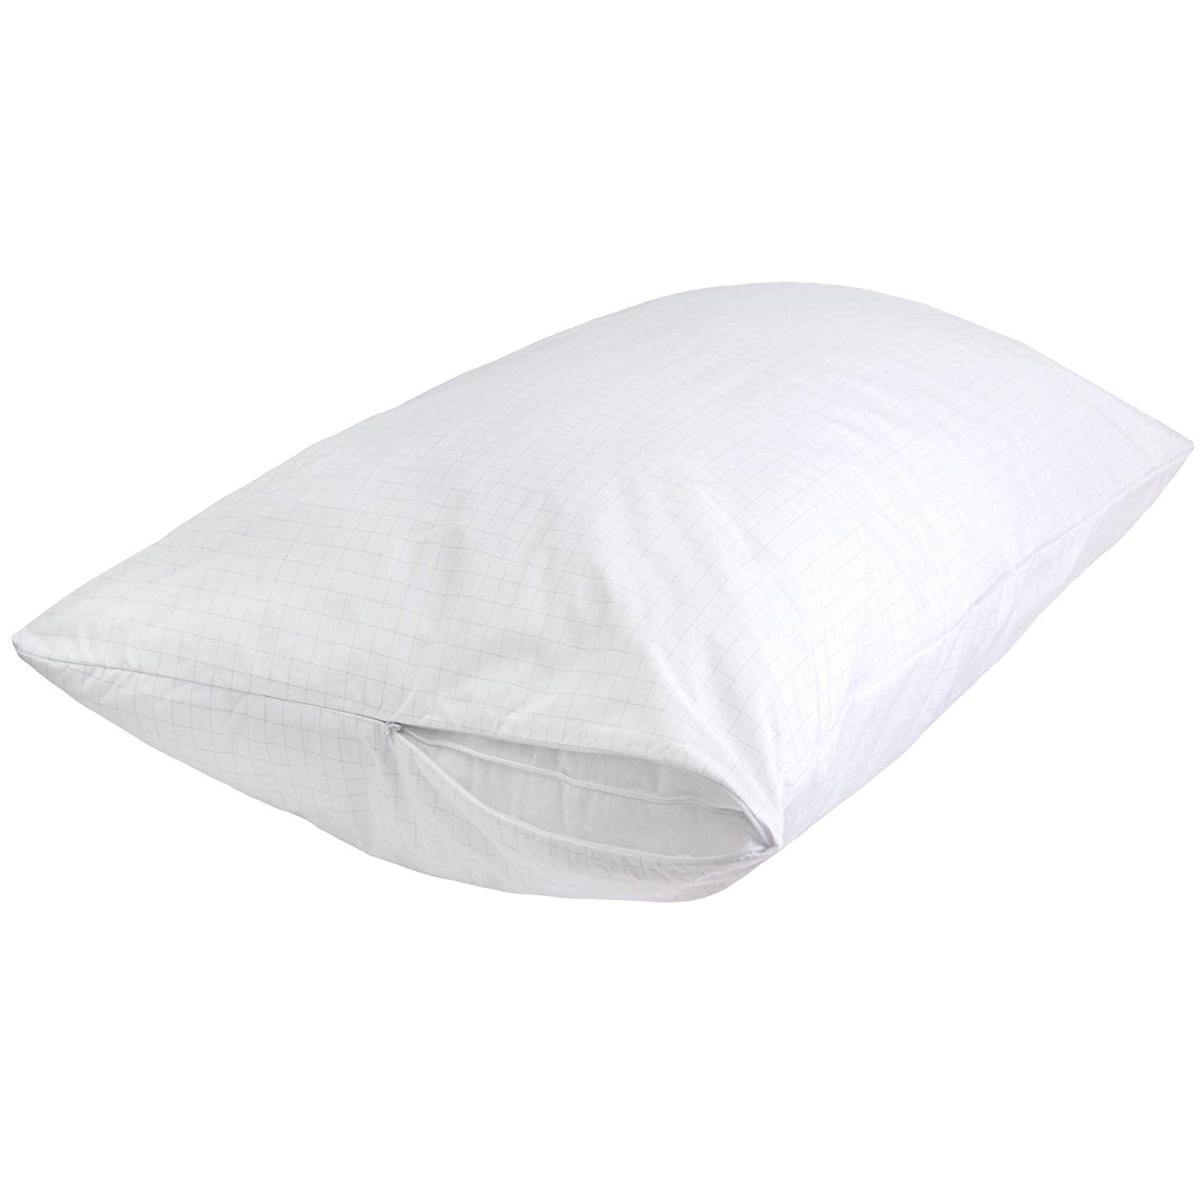 733388 Sleep Solutions By Carbon-infused Waterproof Pillow Protector, White - King Size